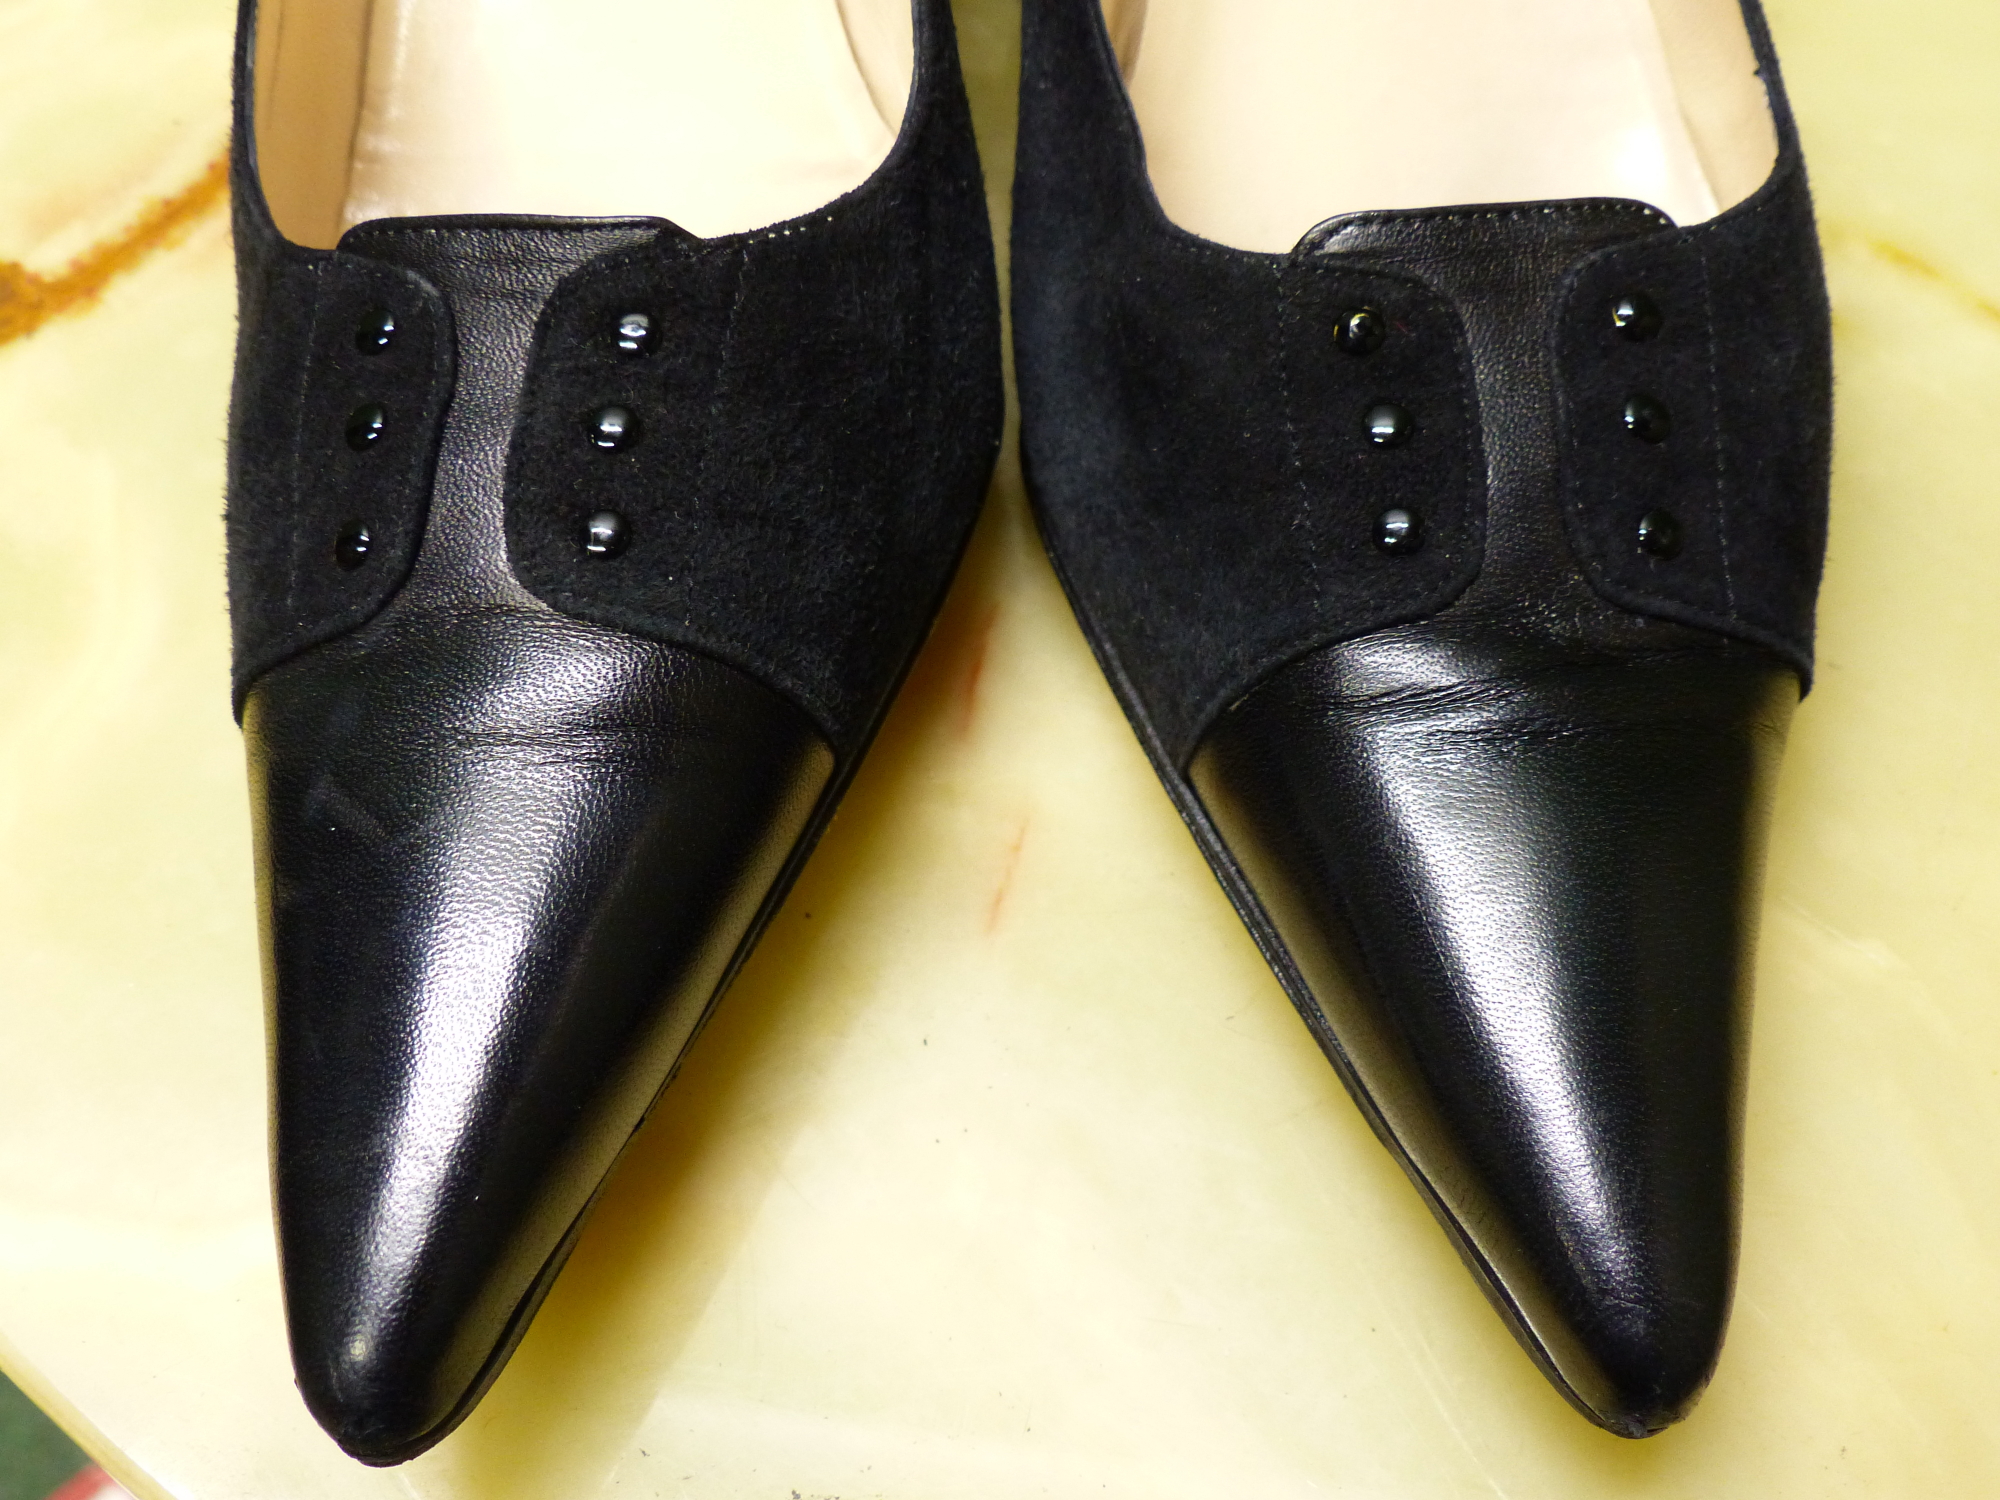 SHOES. THREE PAIR OF JOSEPH AZAGURY LONDON. SUEDE BROWN FLATS EUR SIZE 39. BLACK LEATHER AND SUEDE - Image 10 of 15